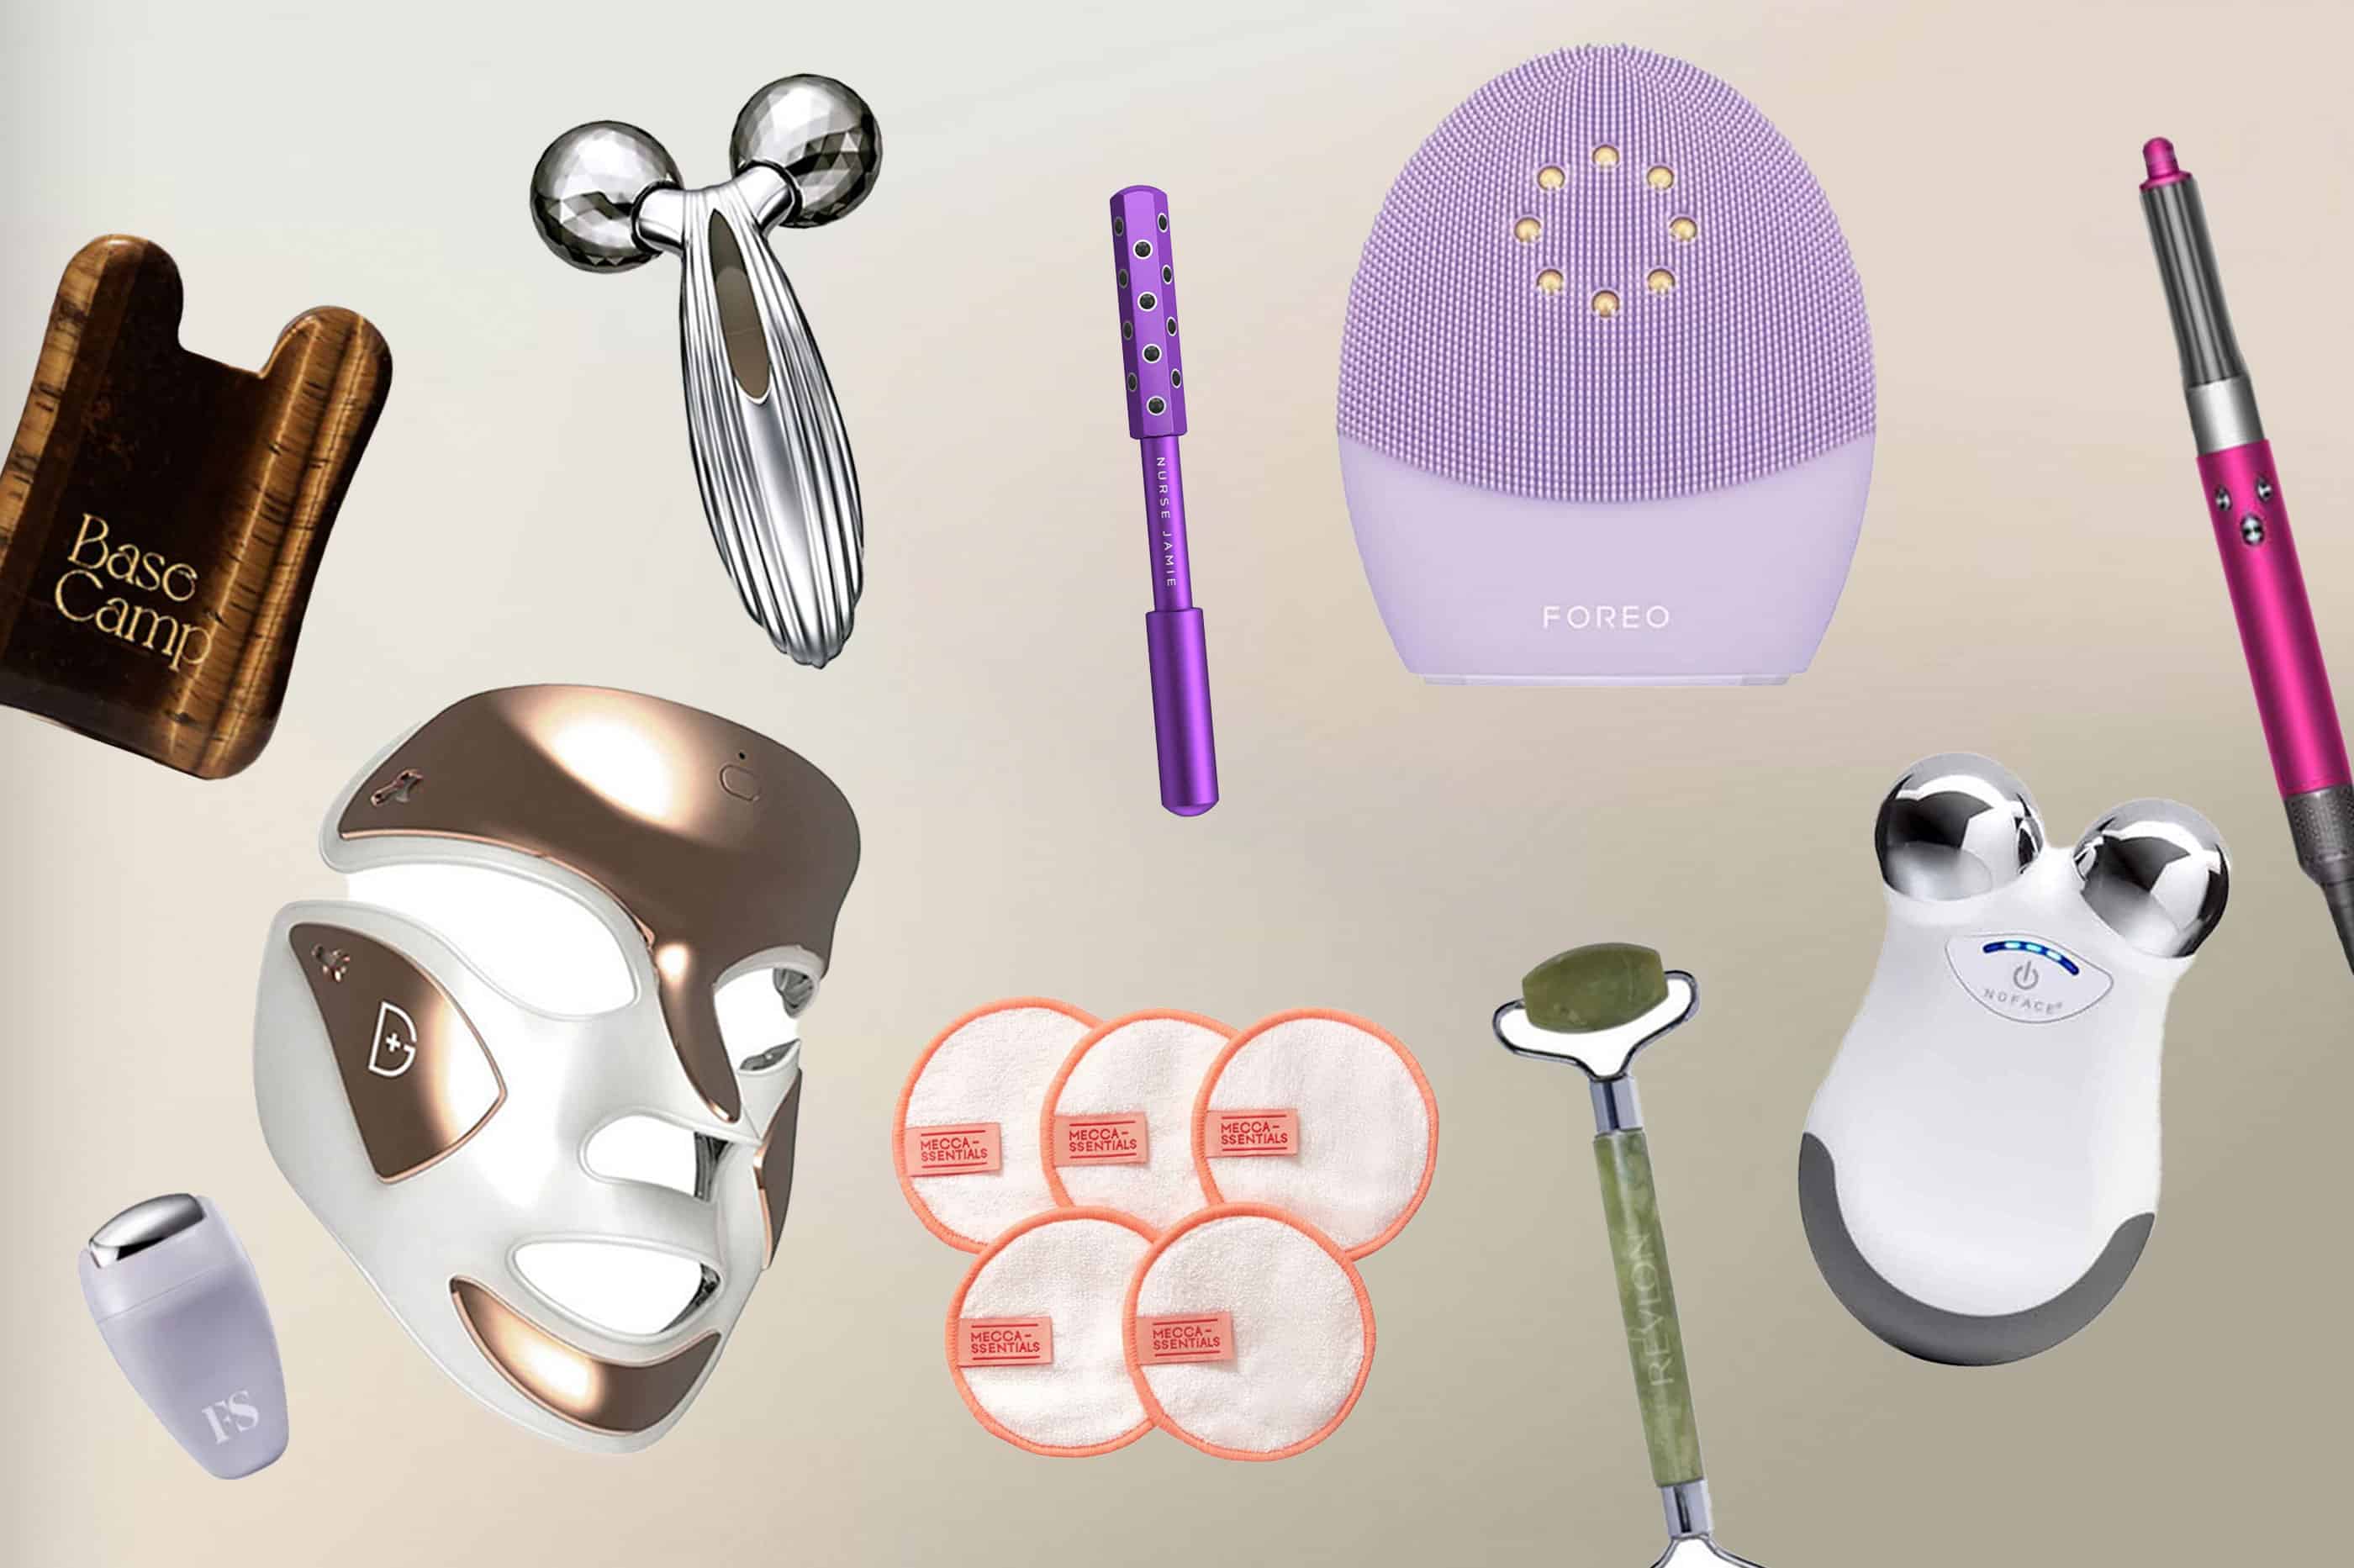 Top 7 most popular beauty tools in America